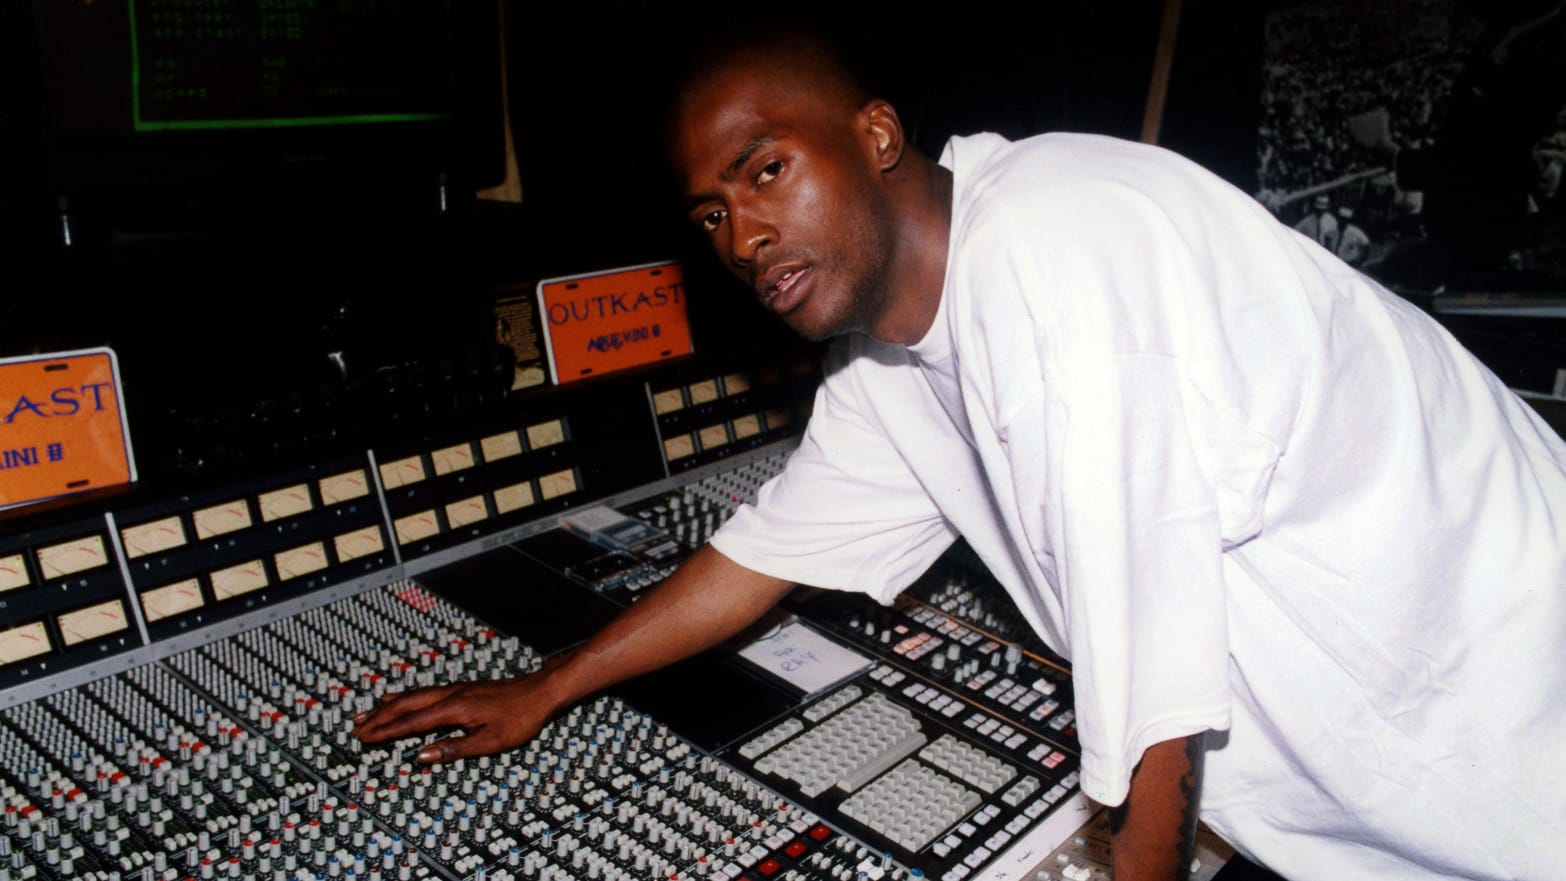 Songwriter and record producer Rico Wade poses for photos while at work in 'The Dungeon' on location in Atlanta, Georgia on April 1, 2001. 